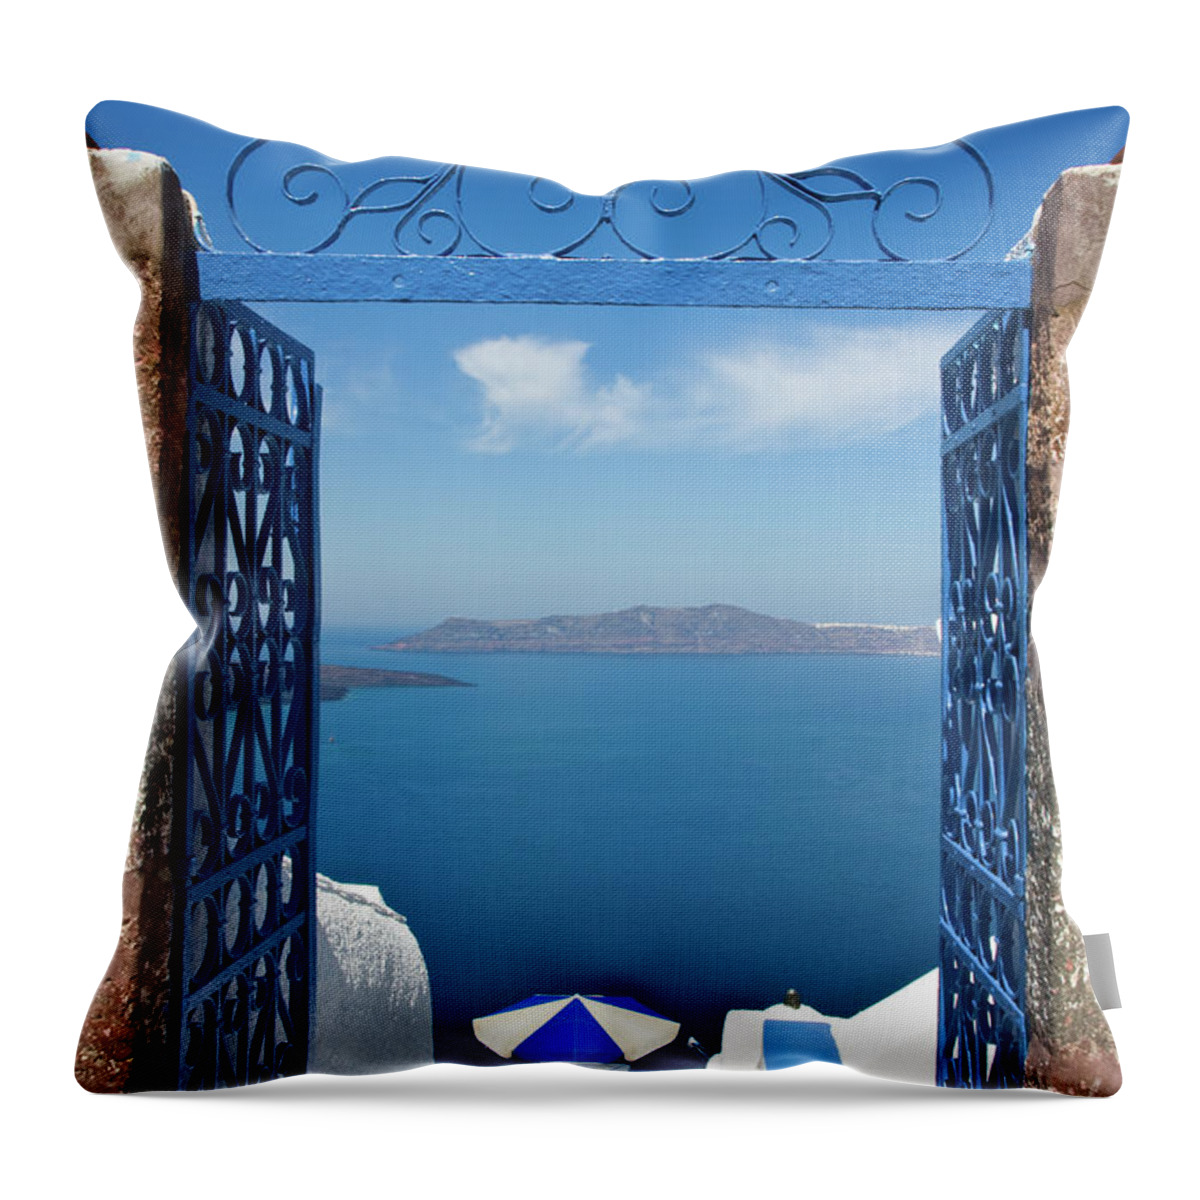 Steps Throw Pillow featuring the photograph Photo Of The Ocean Through A Blue Gate by Arturbo